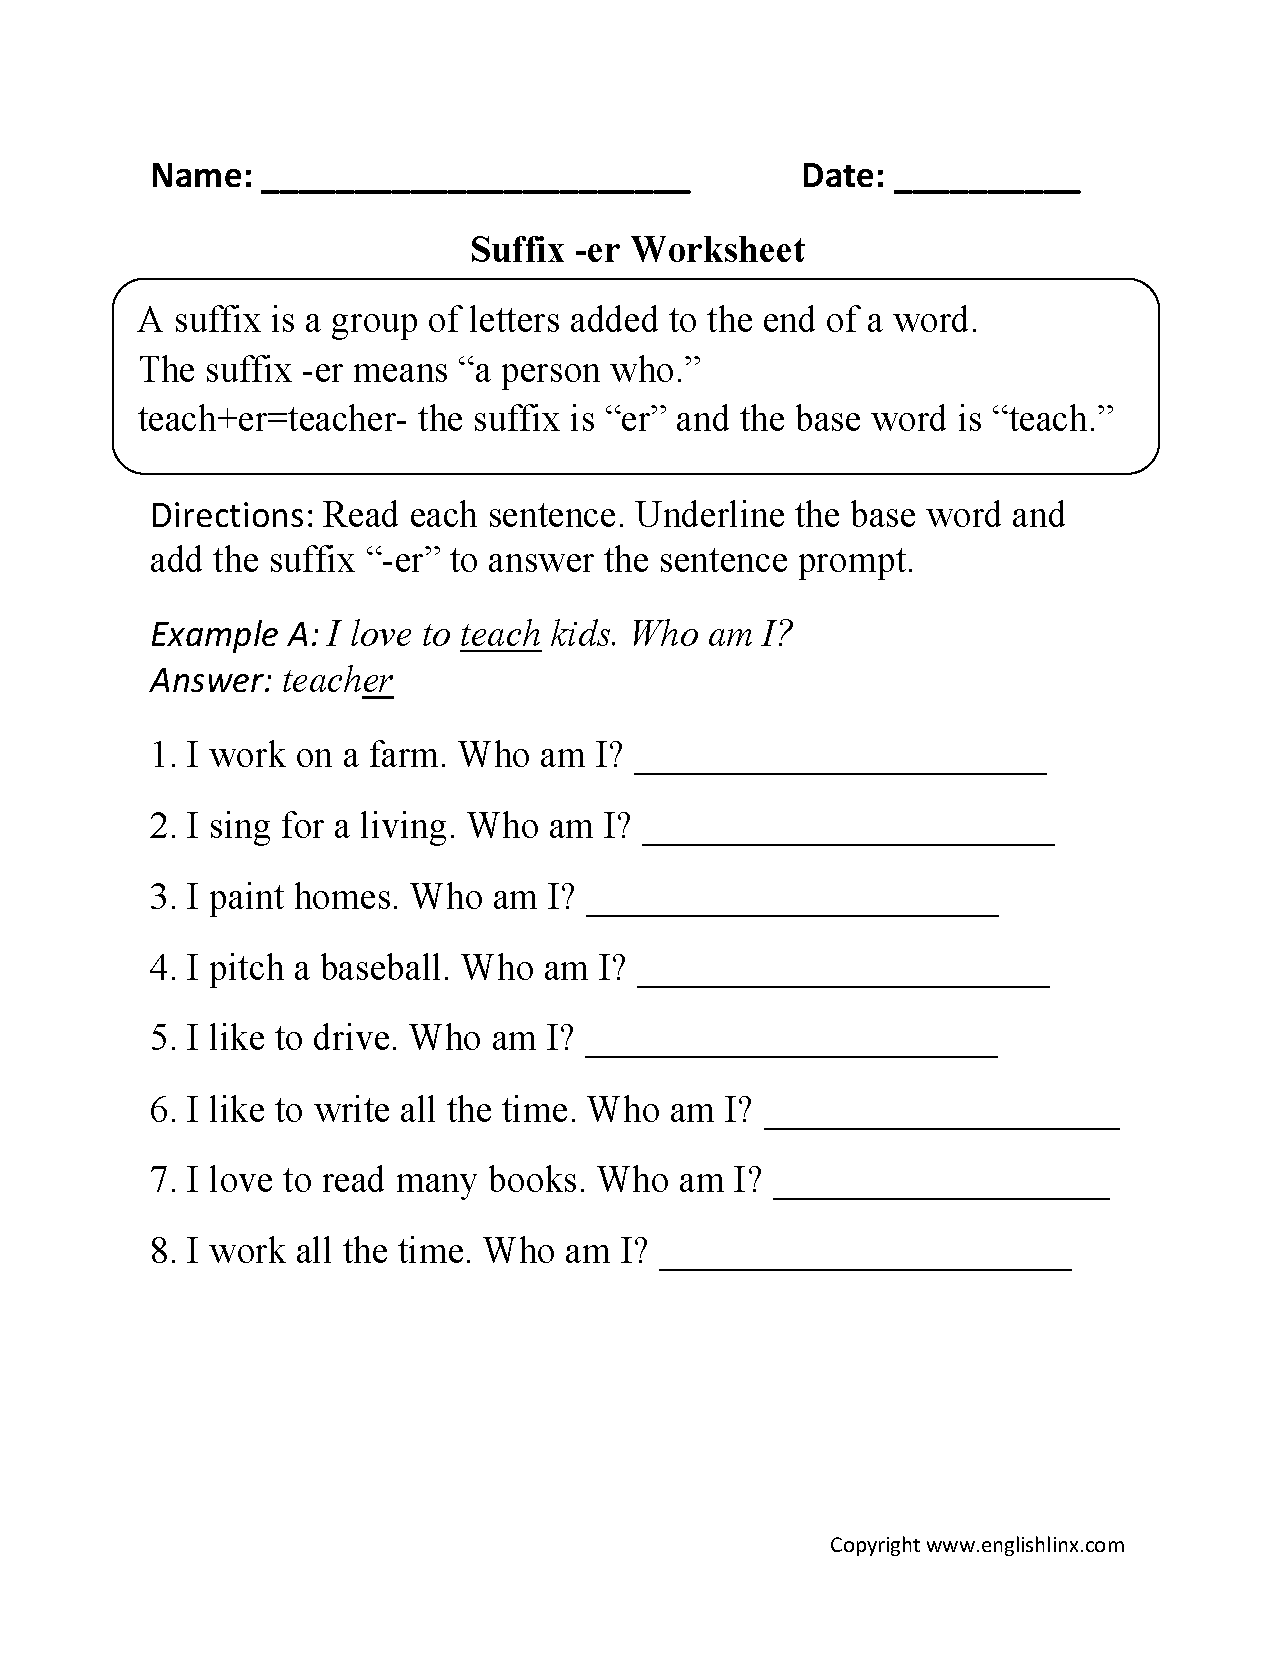 Suffixes -er Worksheets